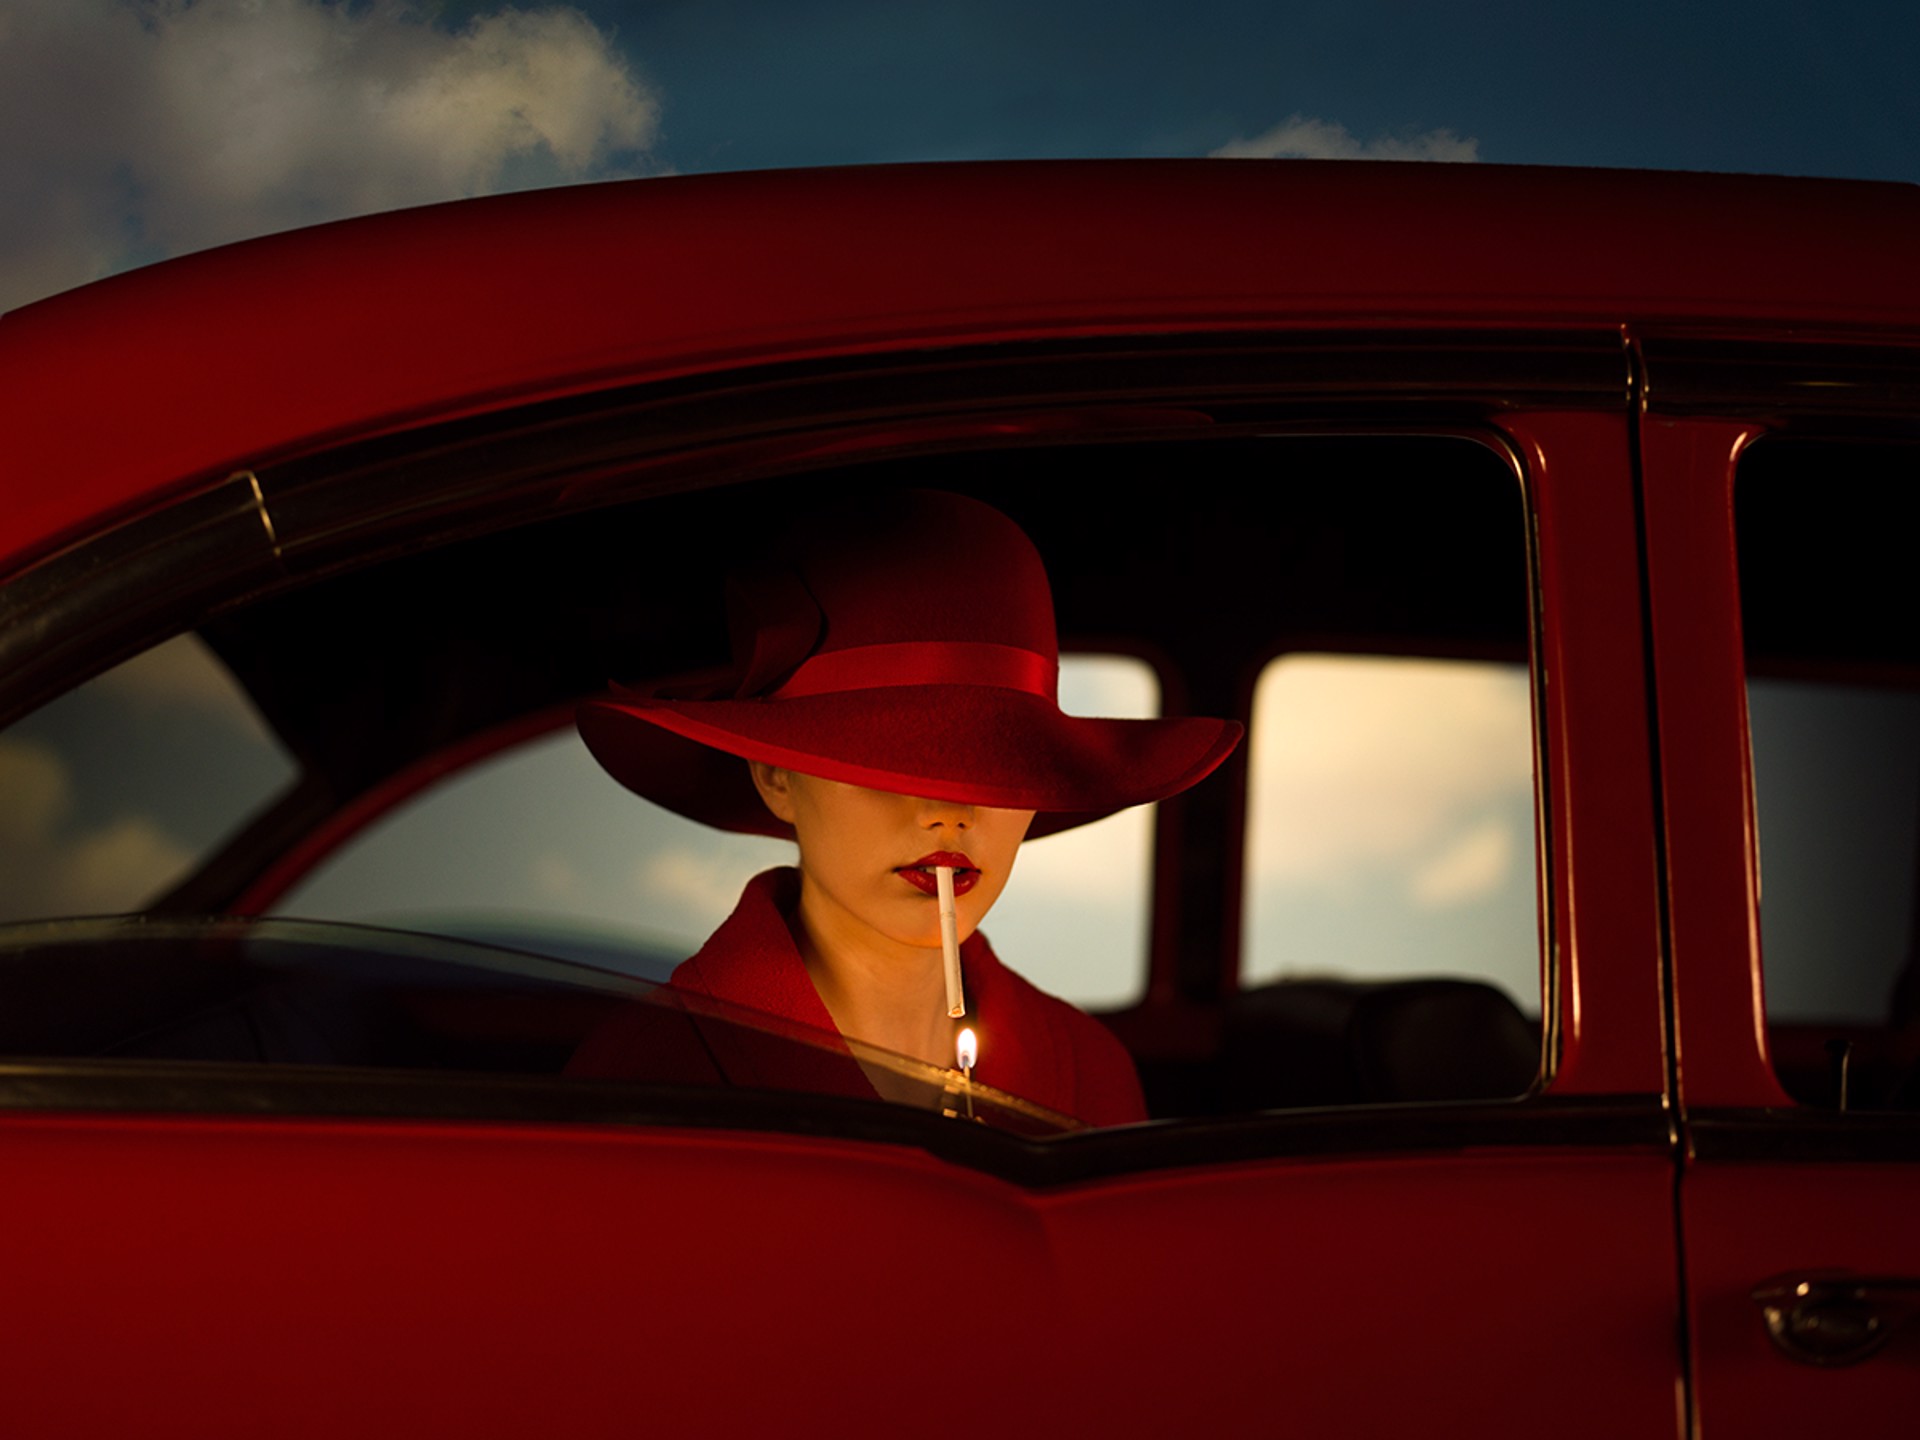 The Girl In The Red Car by Tyler Shields